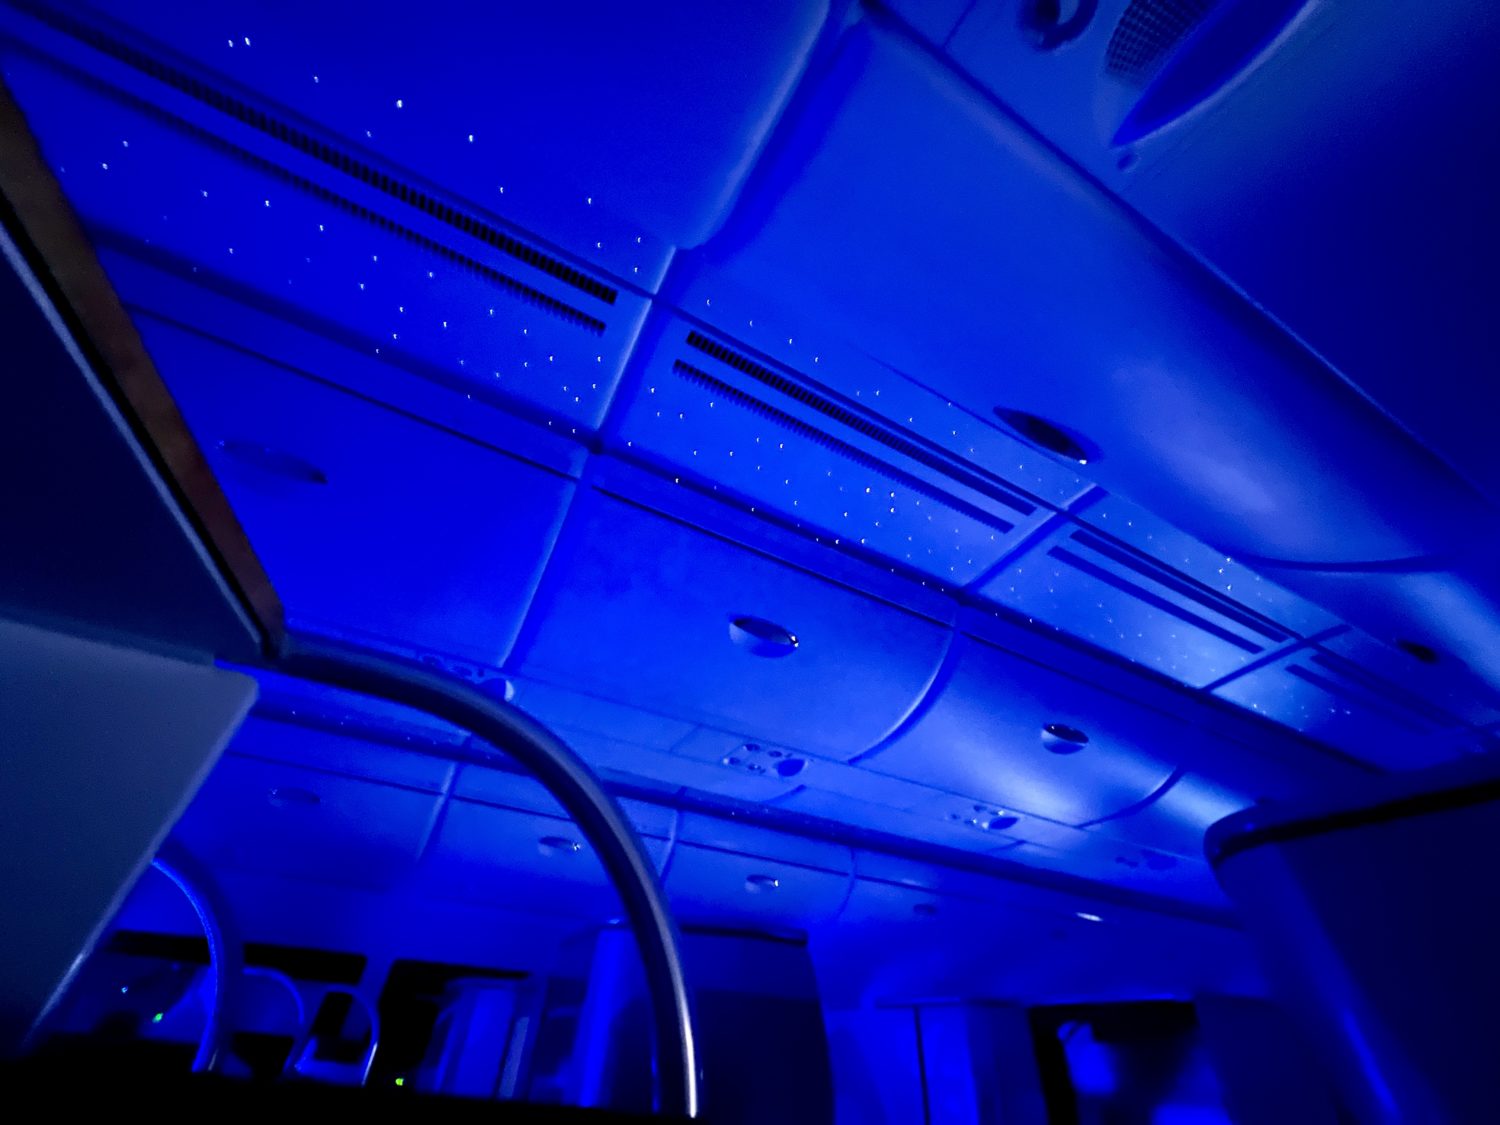 emirates business class cabin with starry sky